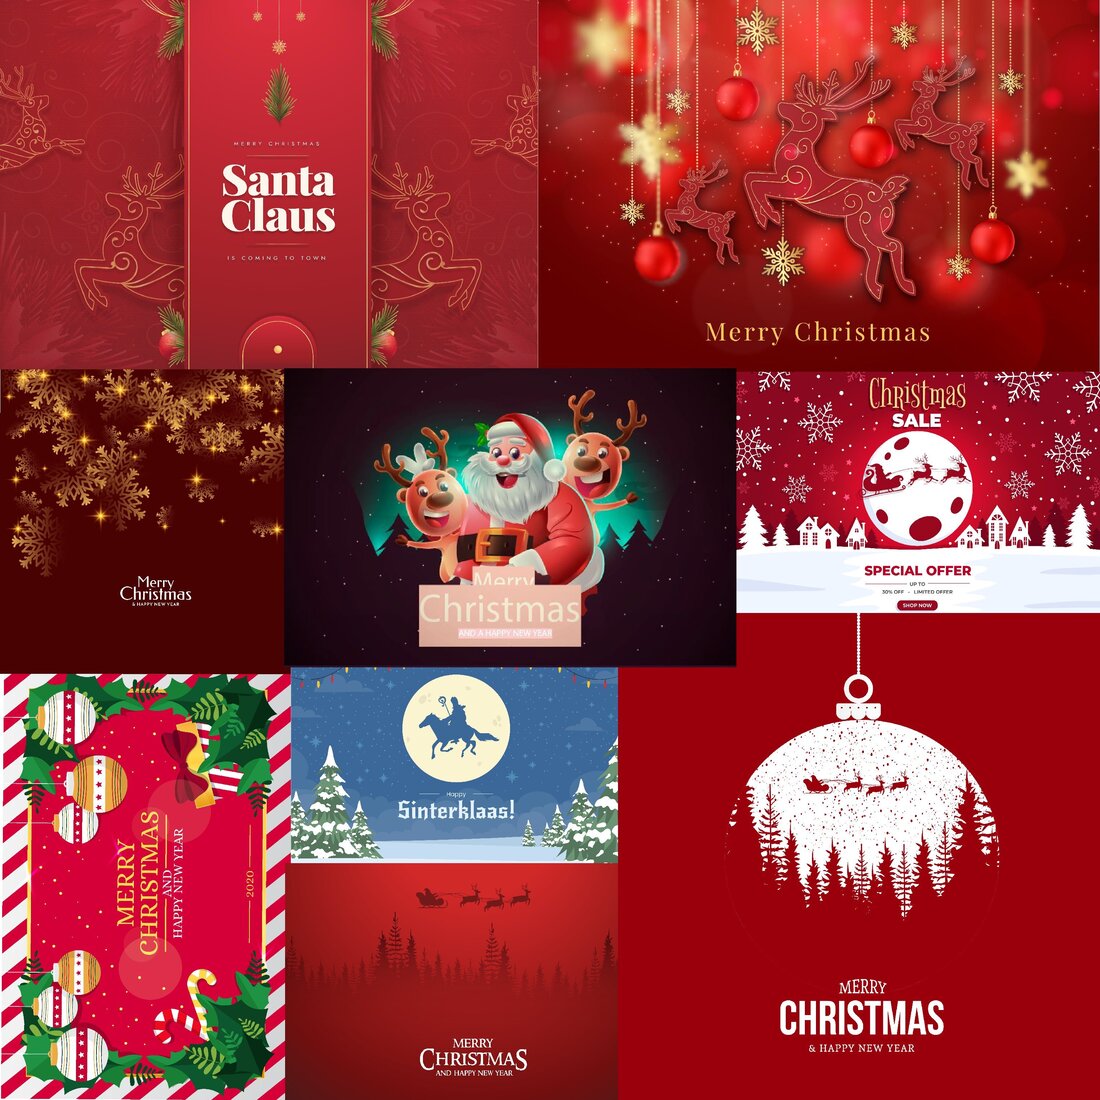 Merry Christmas Backgrounds Design cover image.